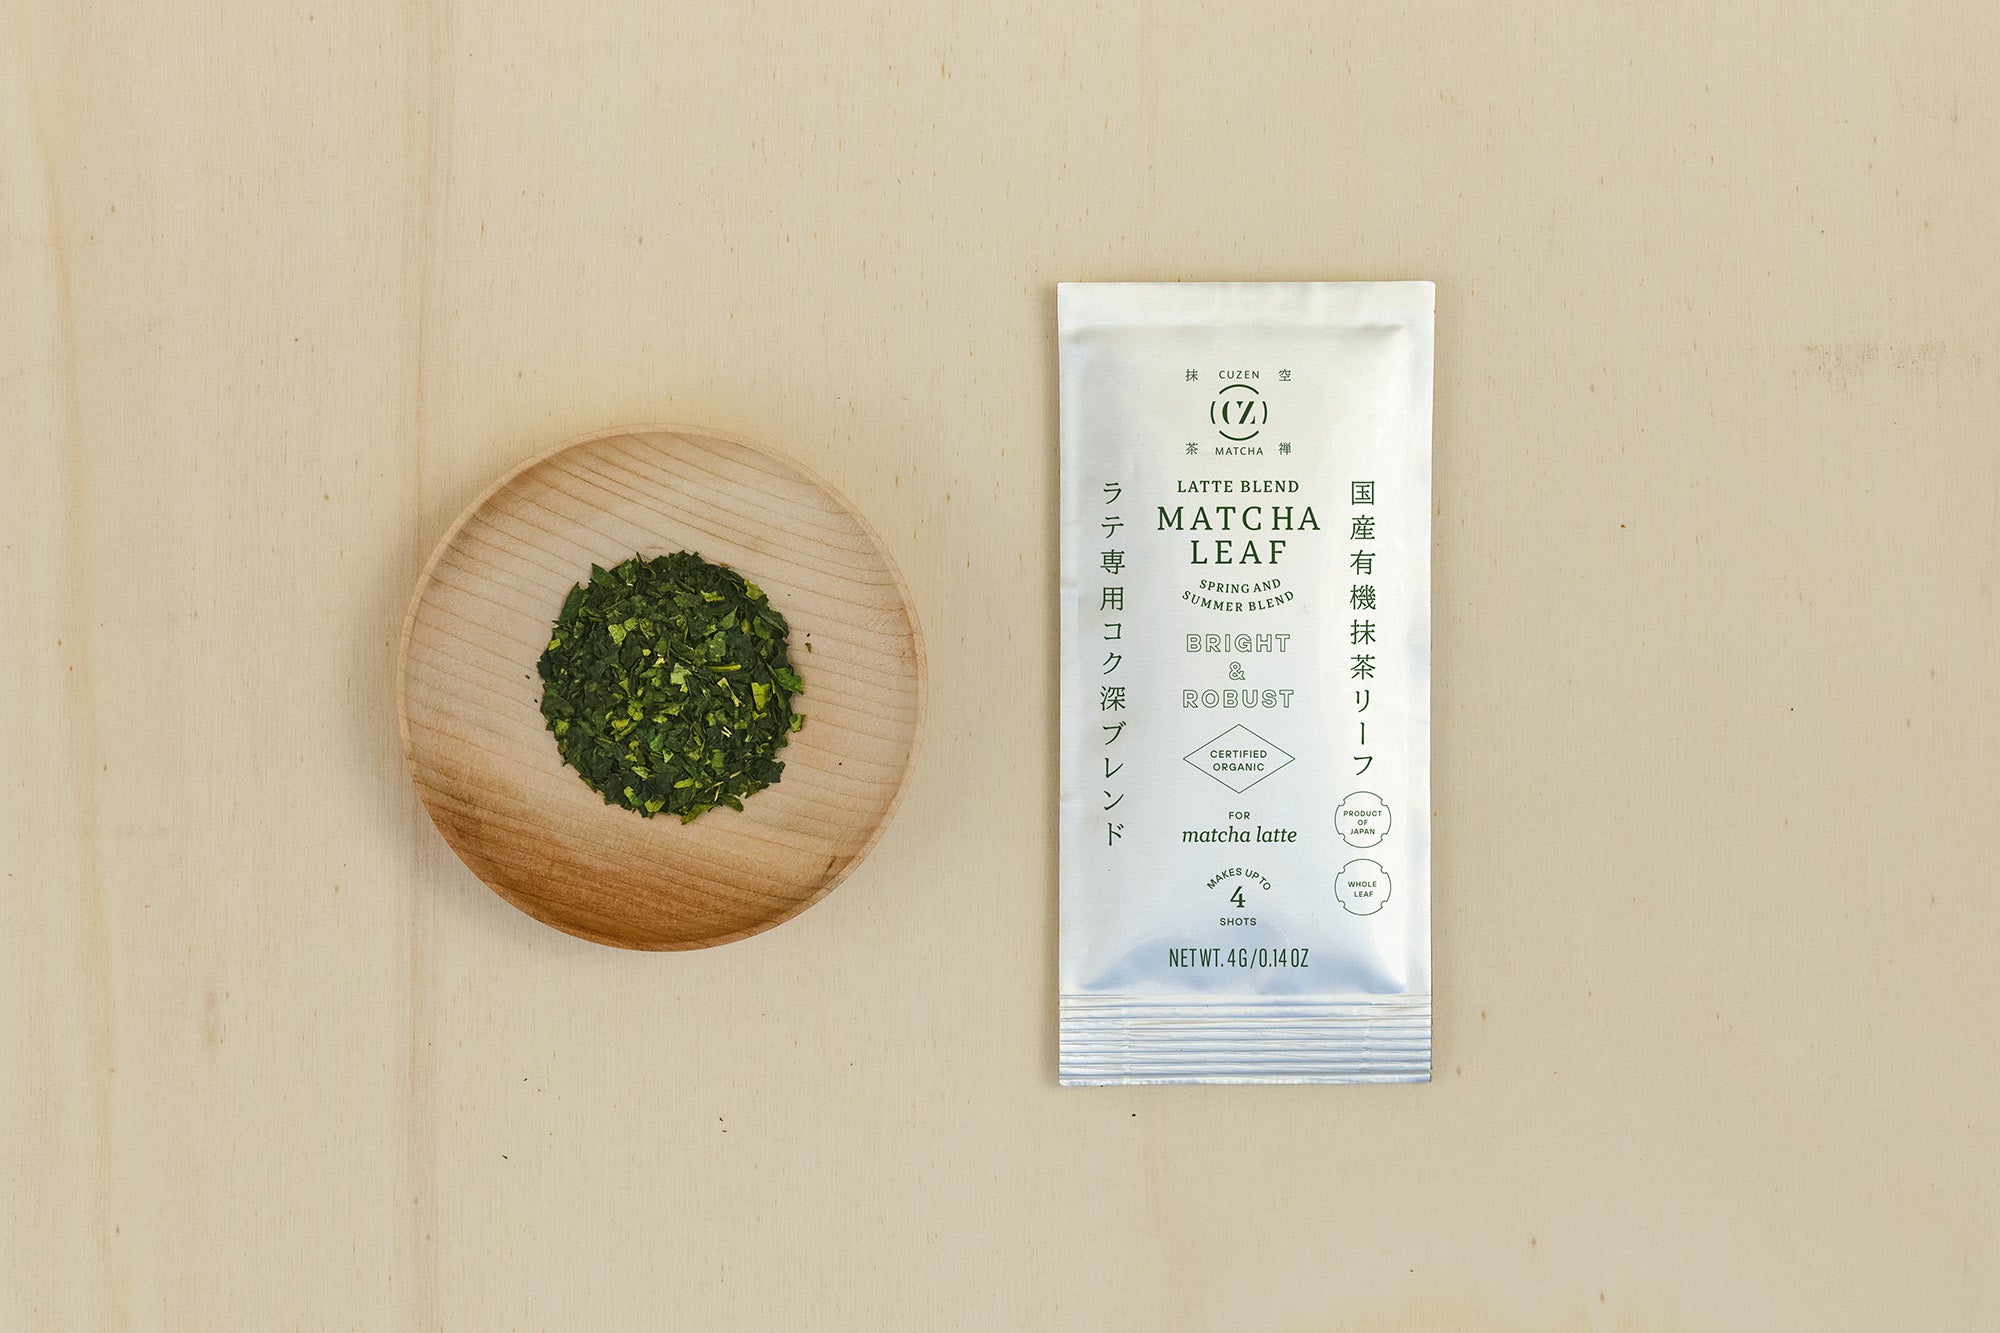 A 4-gram sample packet of Latte Blend Matcha next to a saucerful of deep green matcha leaves.